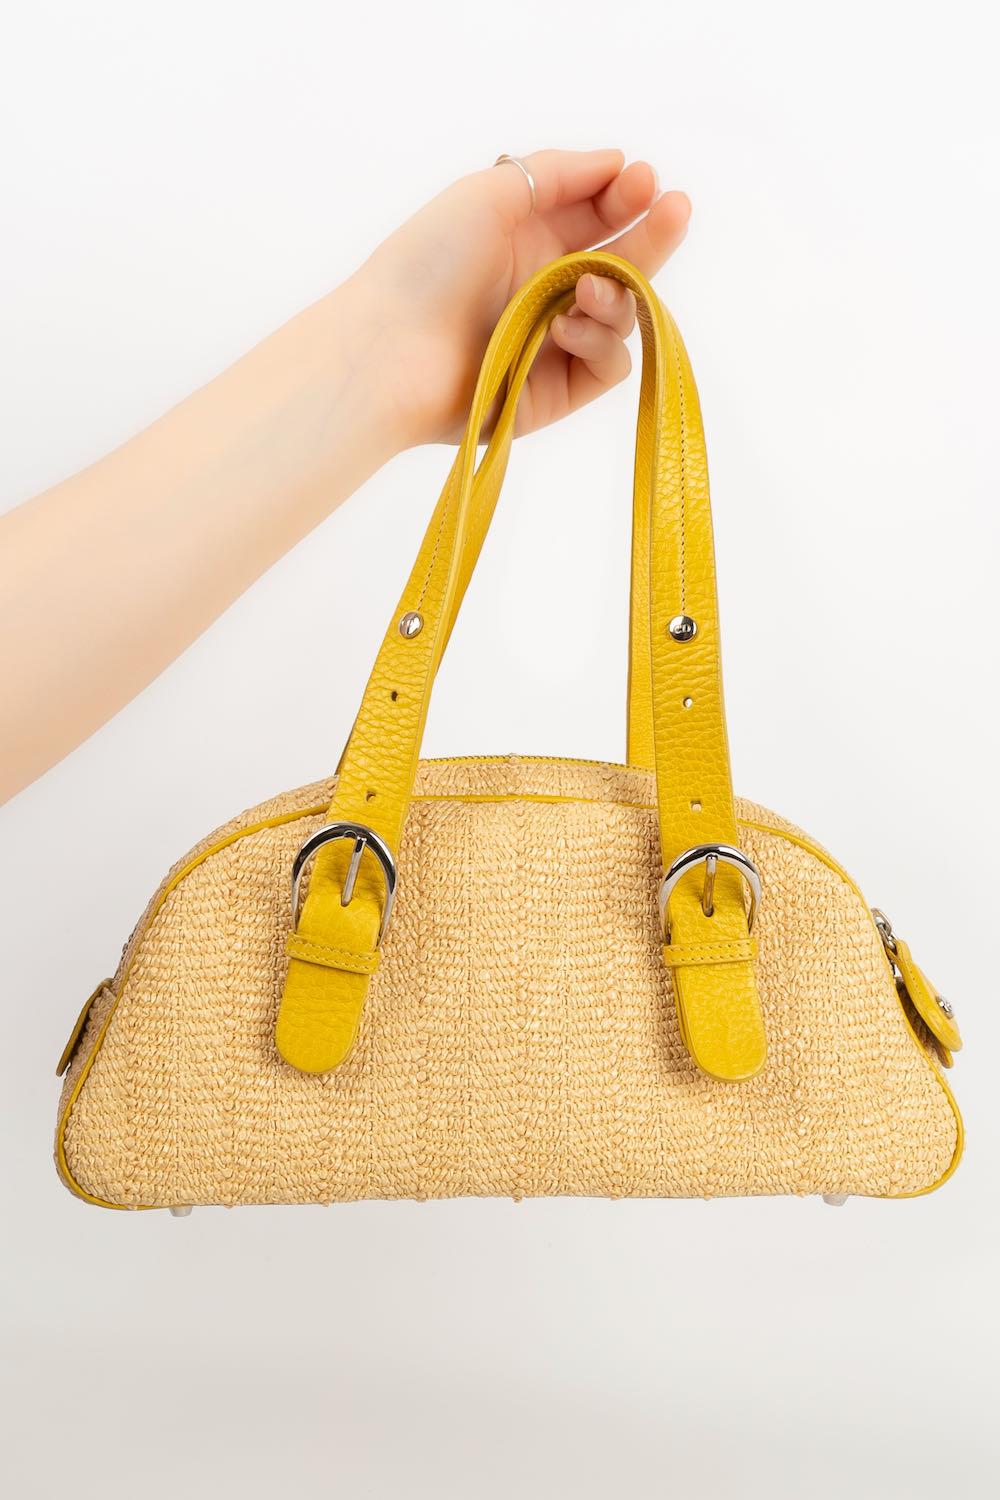 Dior -Bag in raffia and yellow leather decorated with flowers and rhinestones. Limited edition 